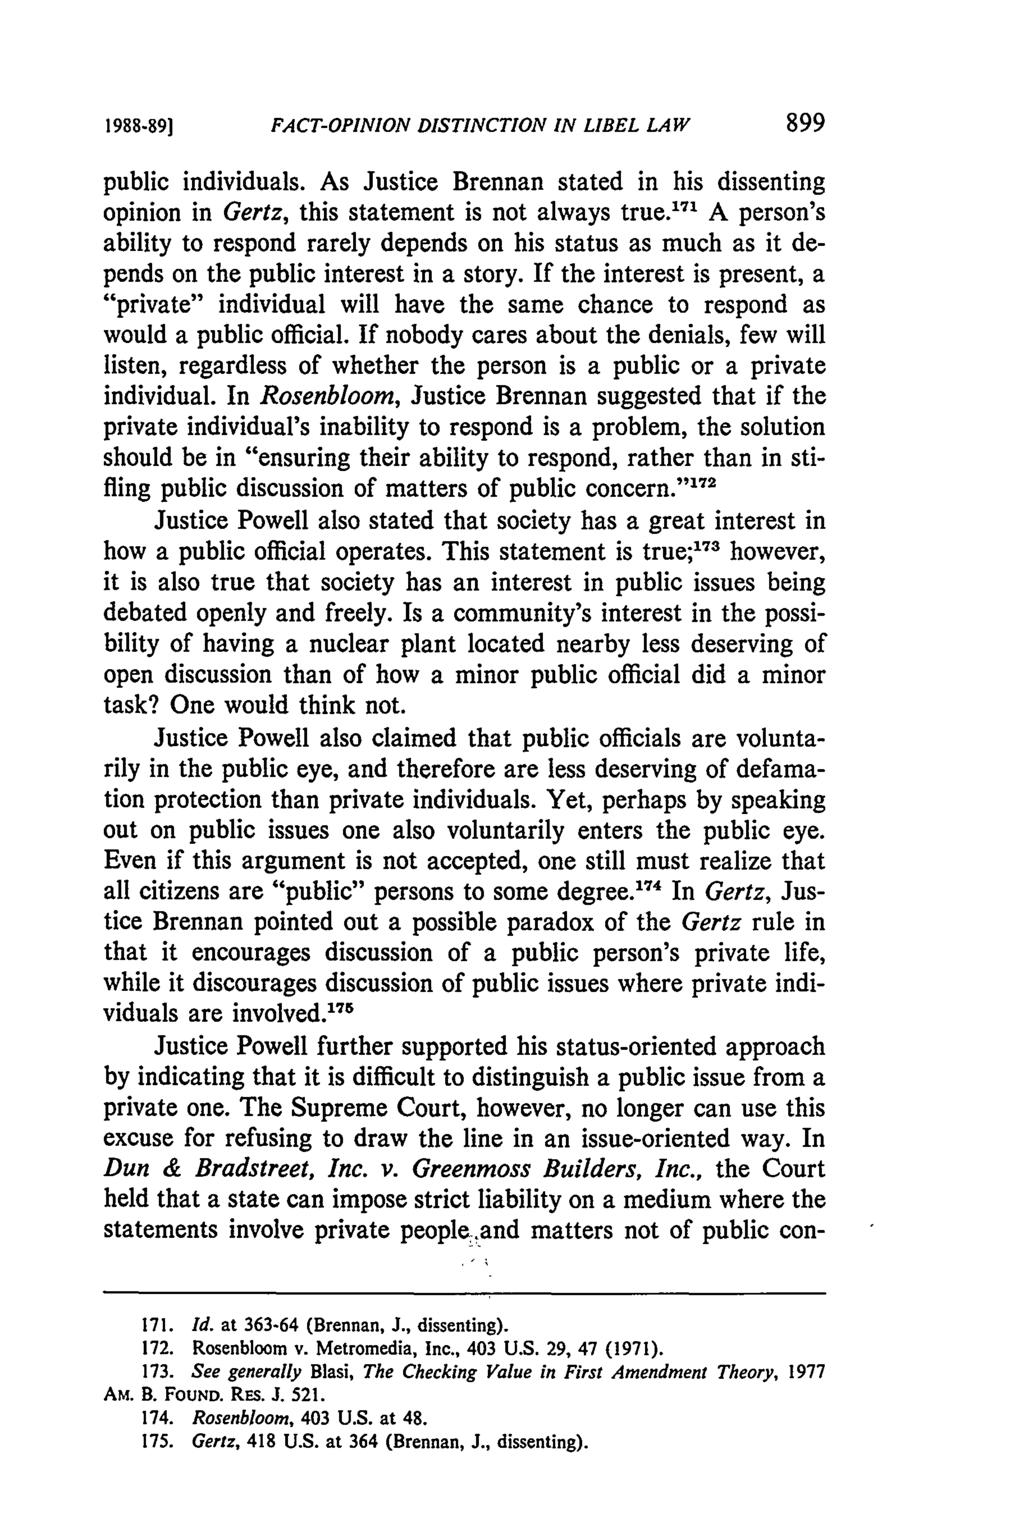 198s-89] FACT-OPINION DISTINCTION IN LIBEL LAW public individuals. As Justice Brennan stated in his dissenting opinion in Gertz, this statement is not always true.